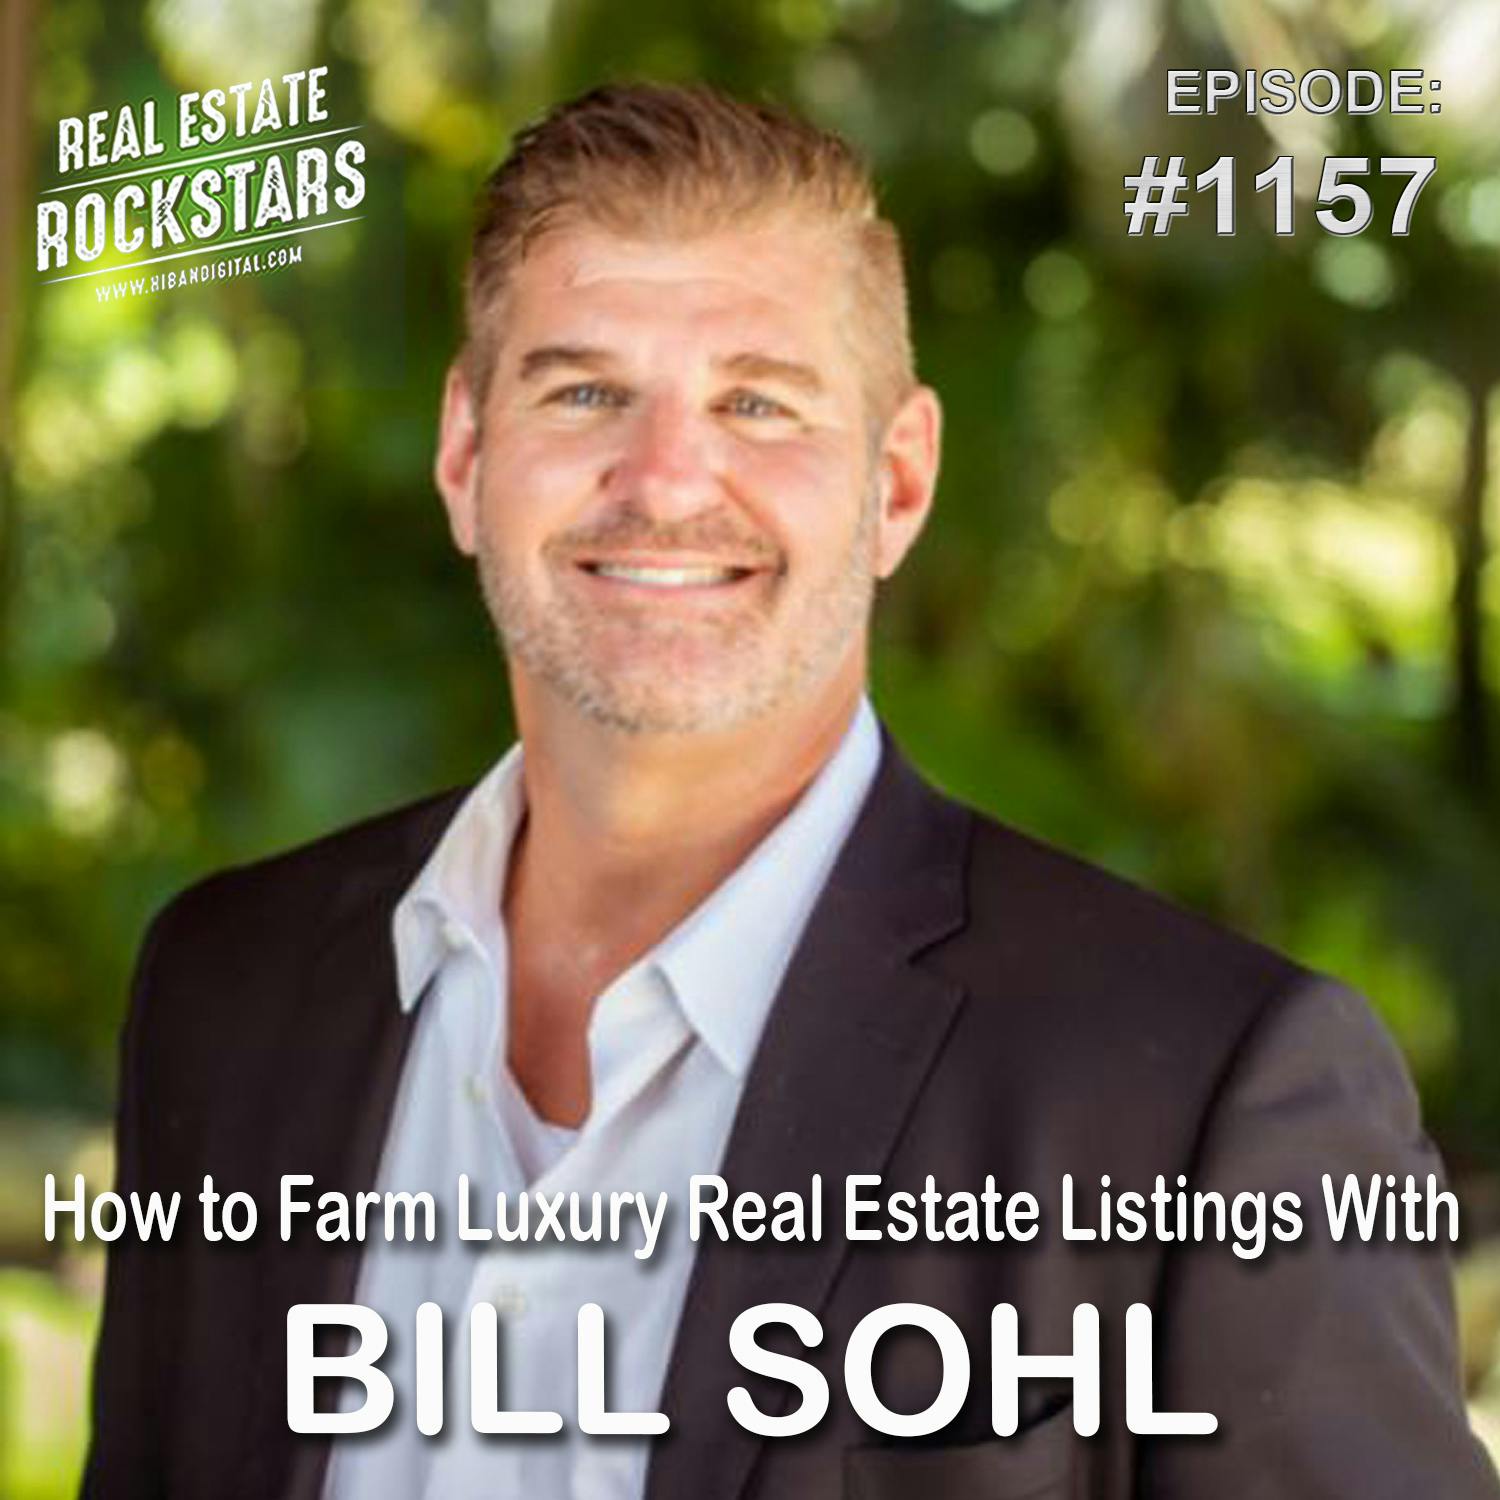 1157: How to Farm Luxury Real Estate Listings With Bill Sohl